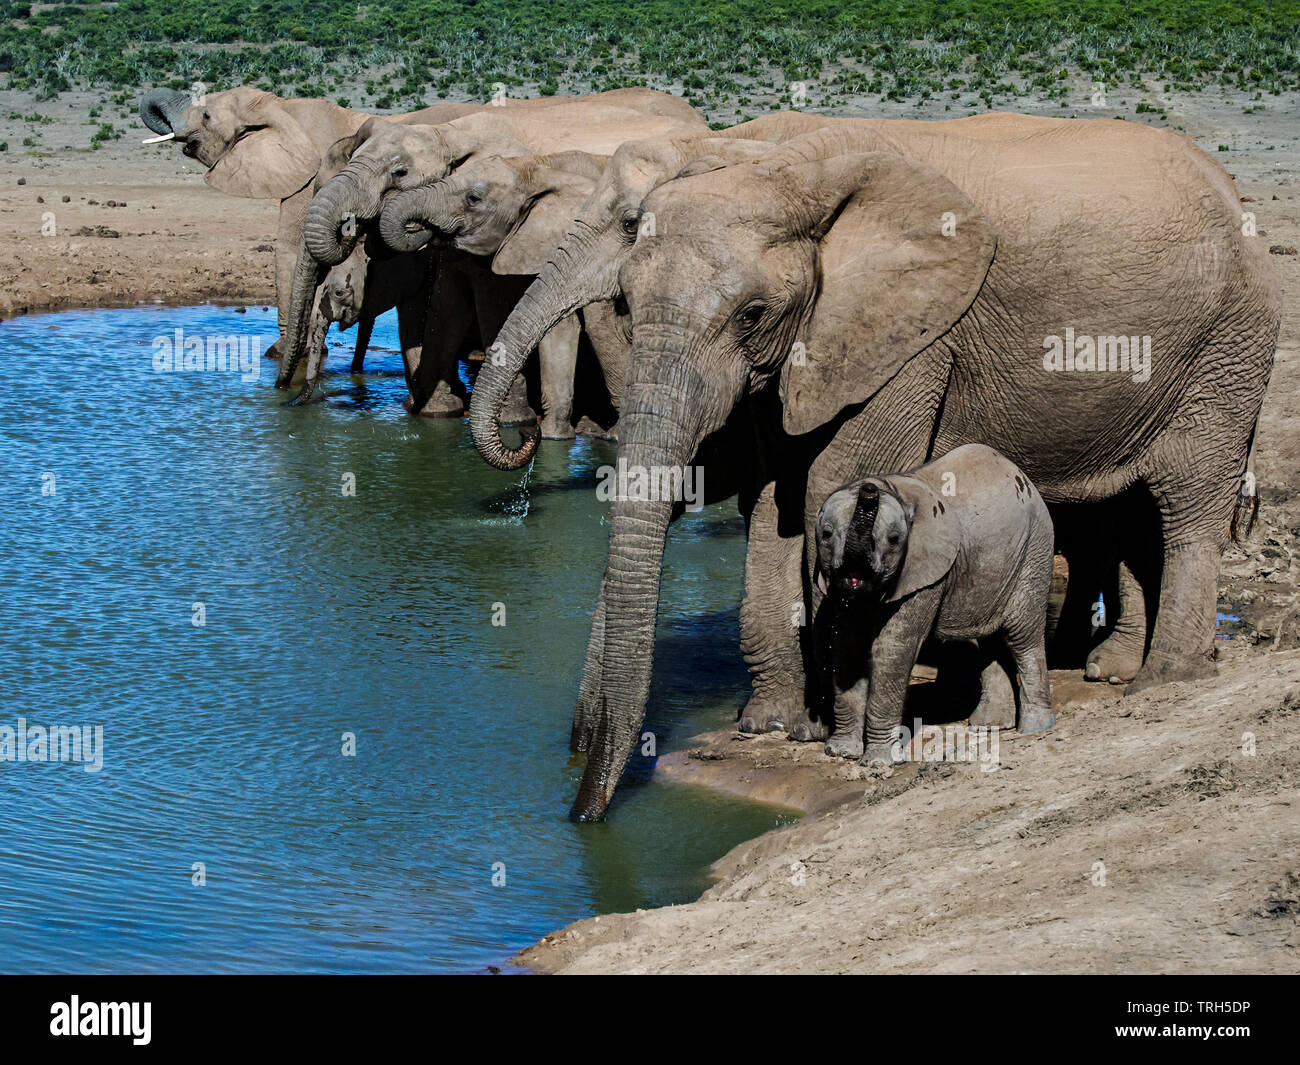 A breeding herd of elephant, Loxodonta africana drinking water in a dam Addo Elephant Park, Eastern Cape Province, South Africa Stock Photo